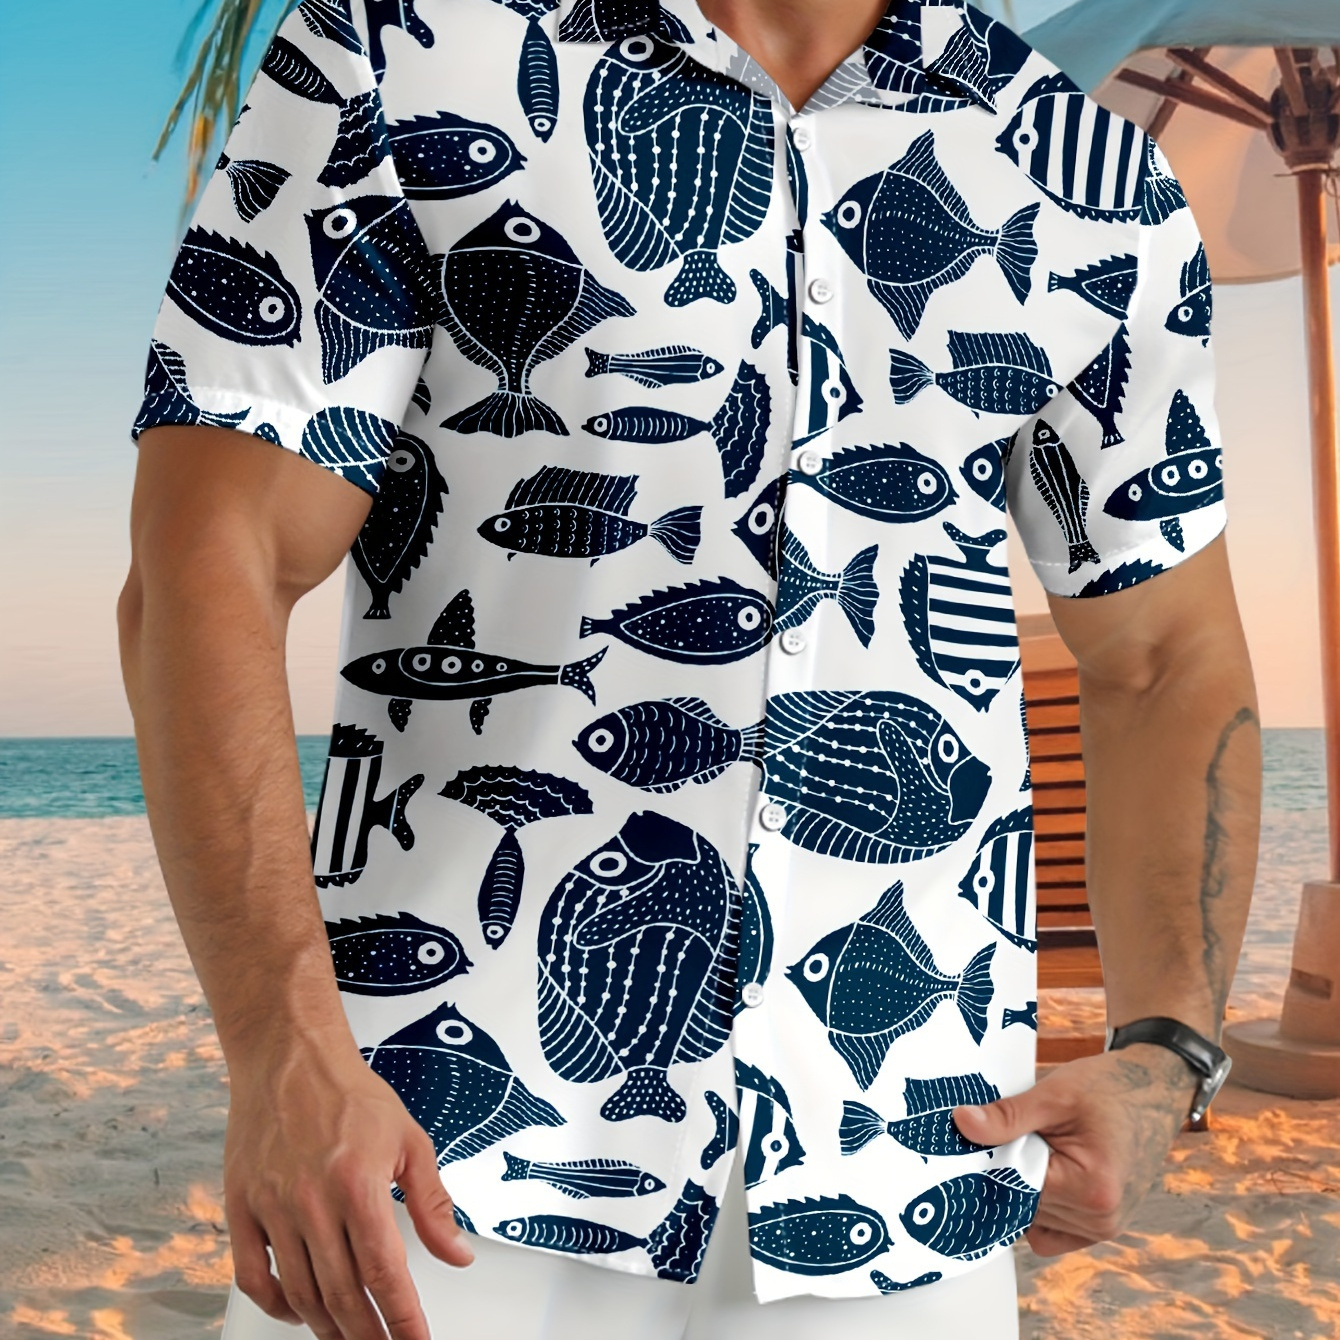 

Men's Fishes Graphic Print Shirt, Casual Lapel Button Up Short Sleeve Shirt For Summer Outdoor Activities